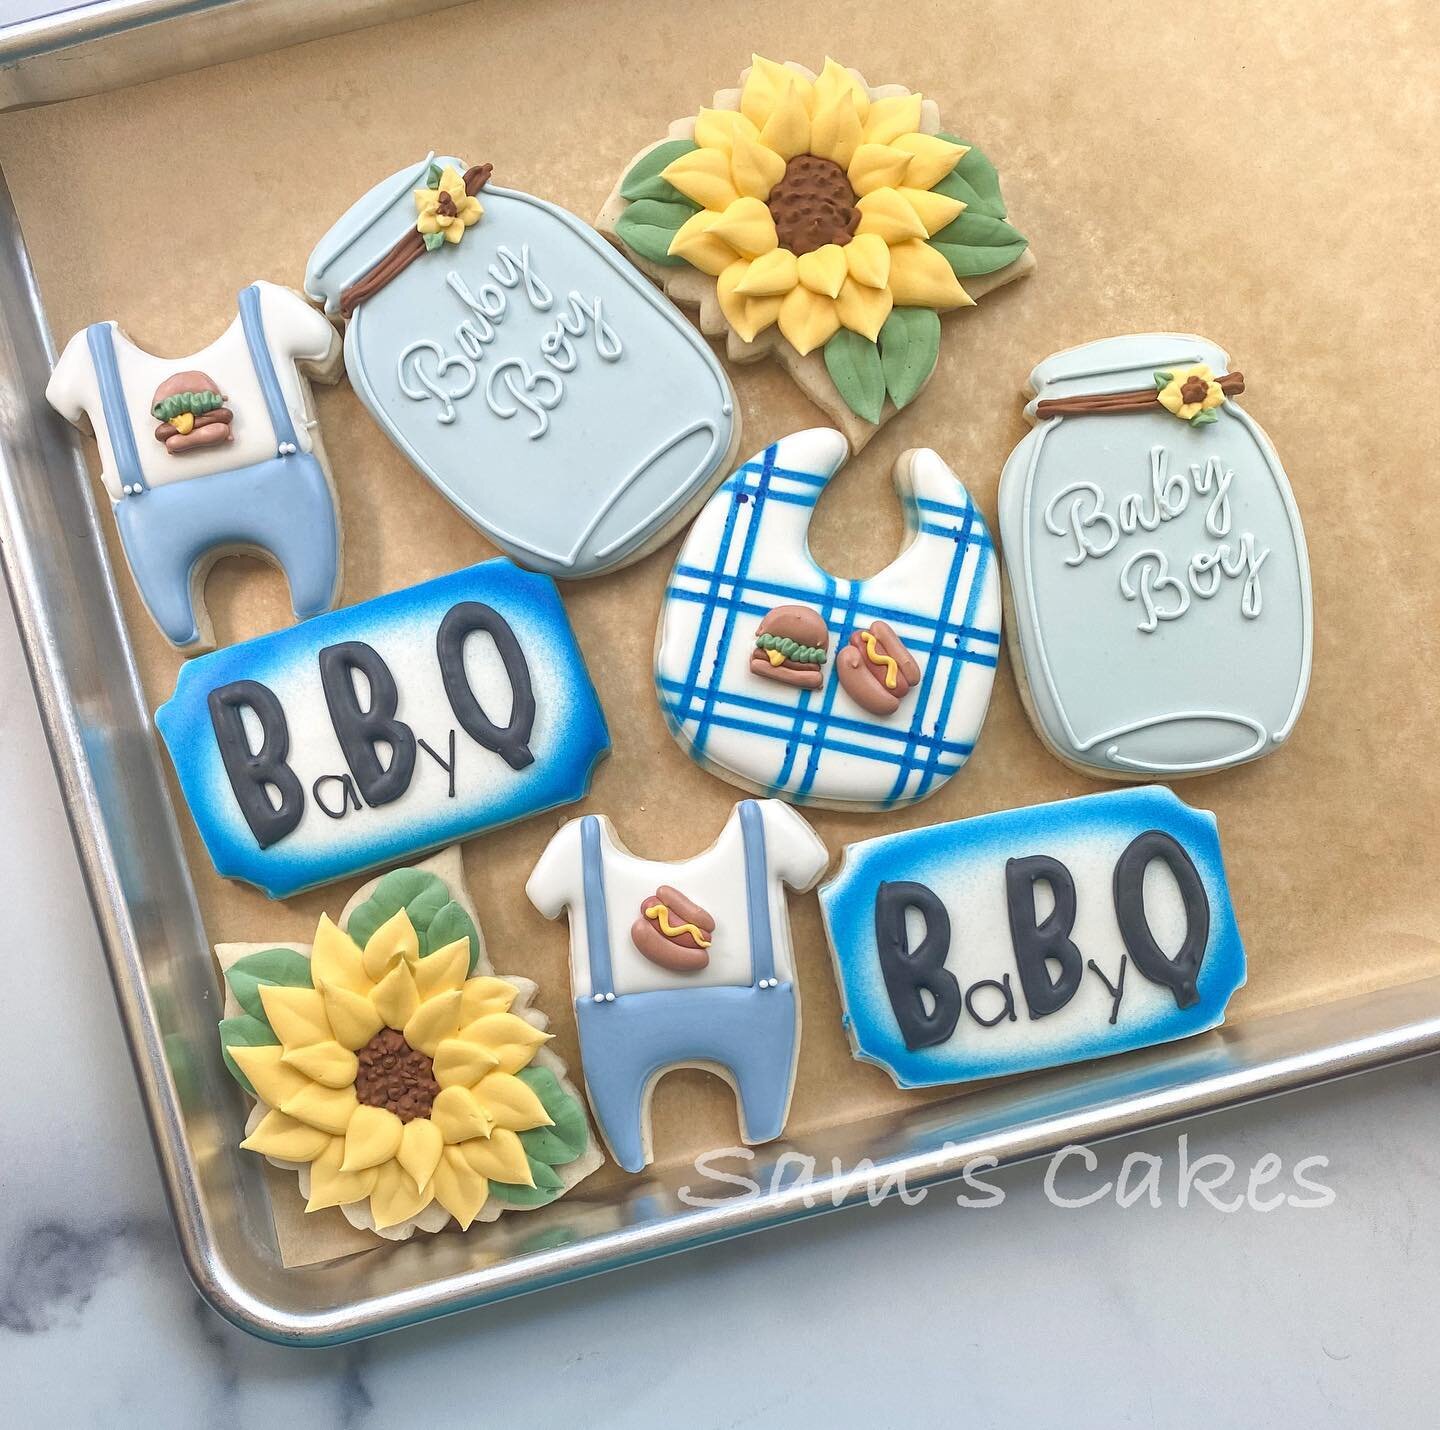 One of my favorite sets ever - a &ldquo;baby-q&rdquo; for the sweetest couple!
.
.
Mega inspiration from @maddiescookieco, her royal icing transfers (hot dog &amp; burger) were too cute not to use! Onesie idea from her as well
.
.
#samscakes #babysho